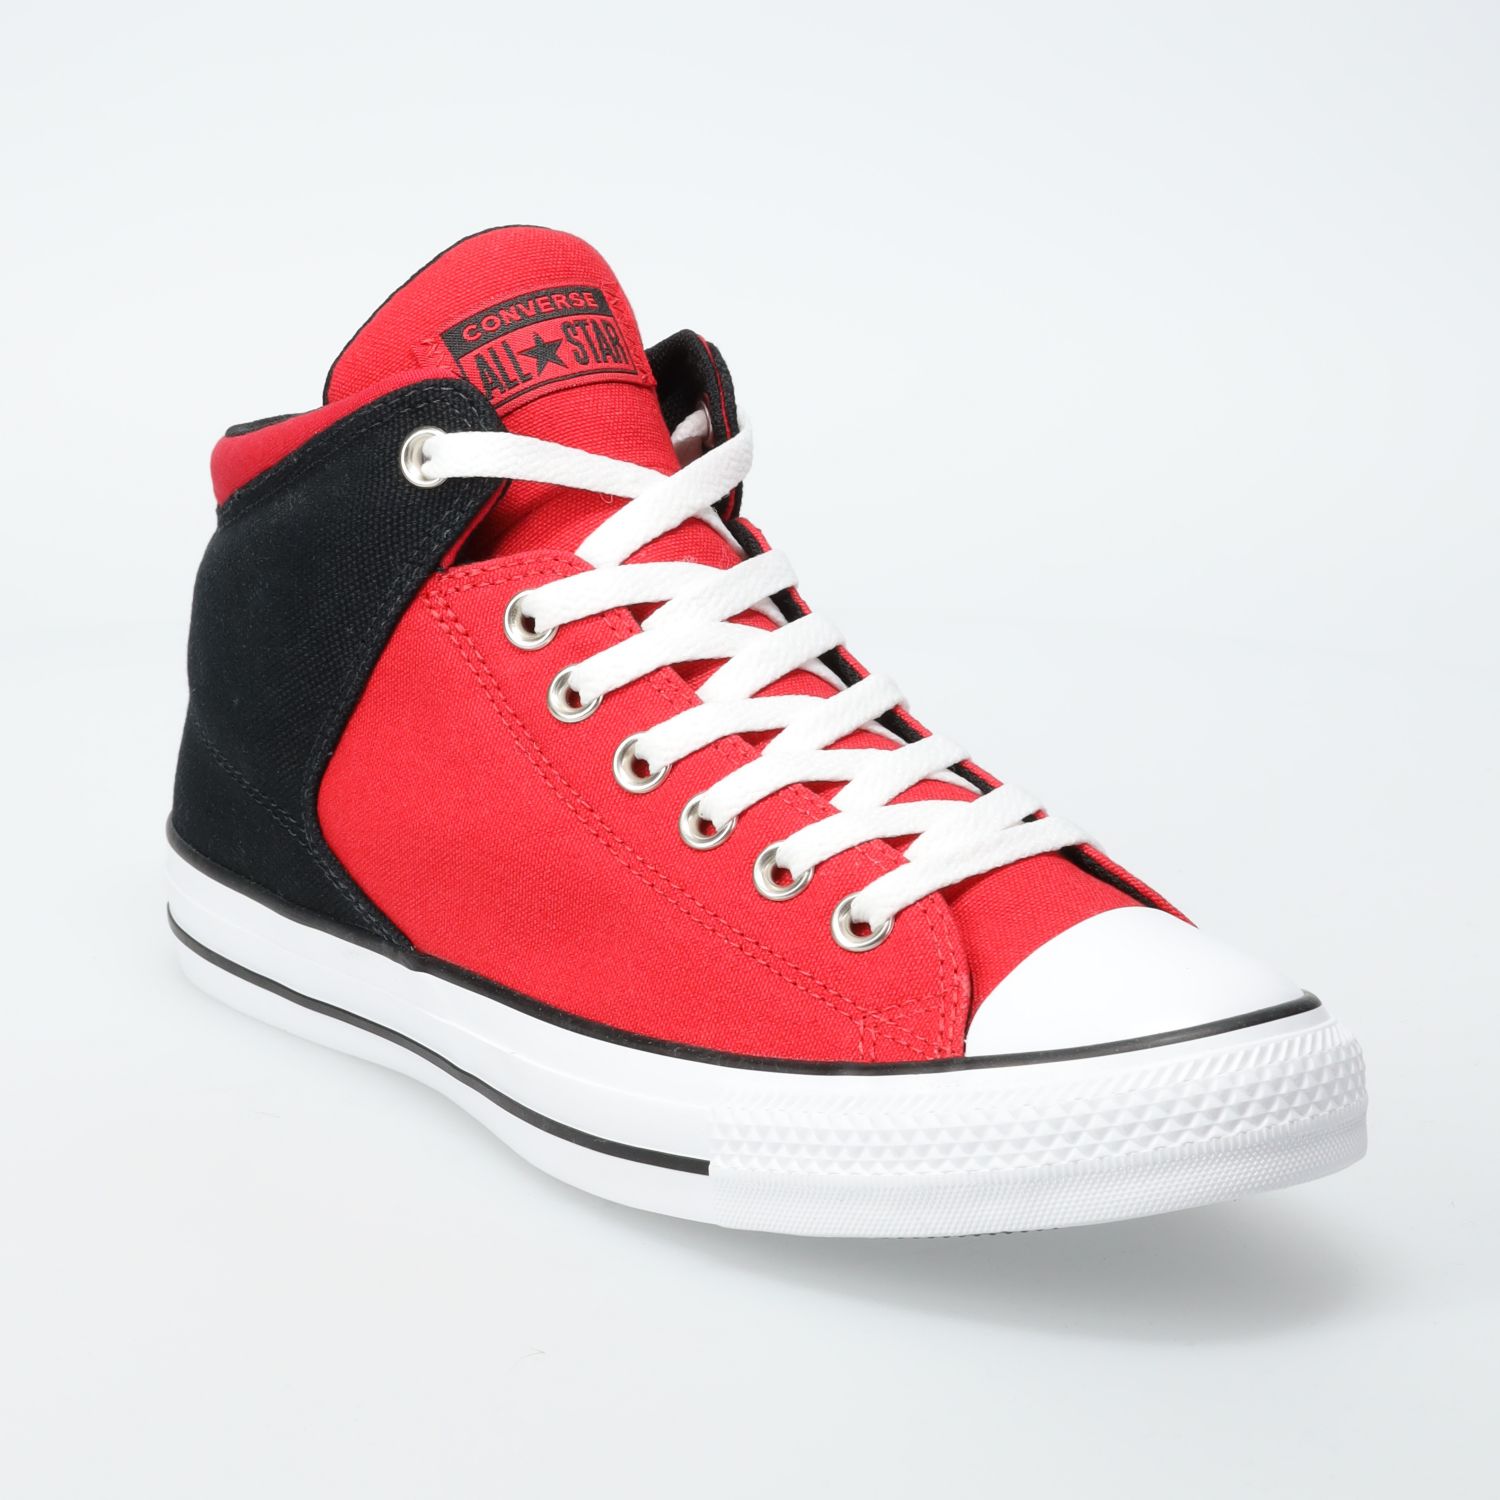 Mens Red Converse Shoes | Kohl's